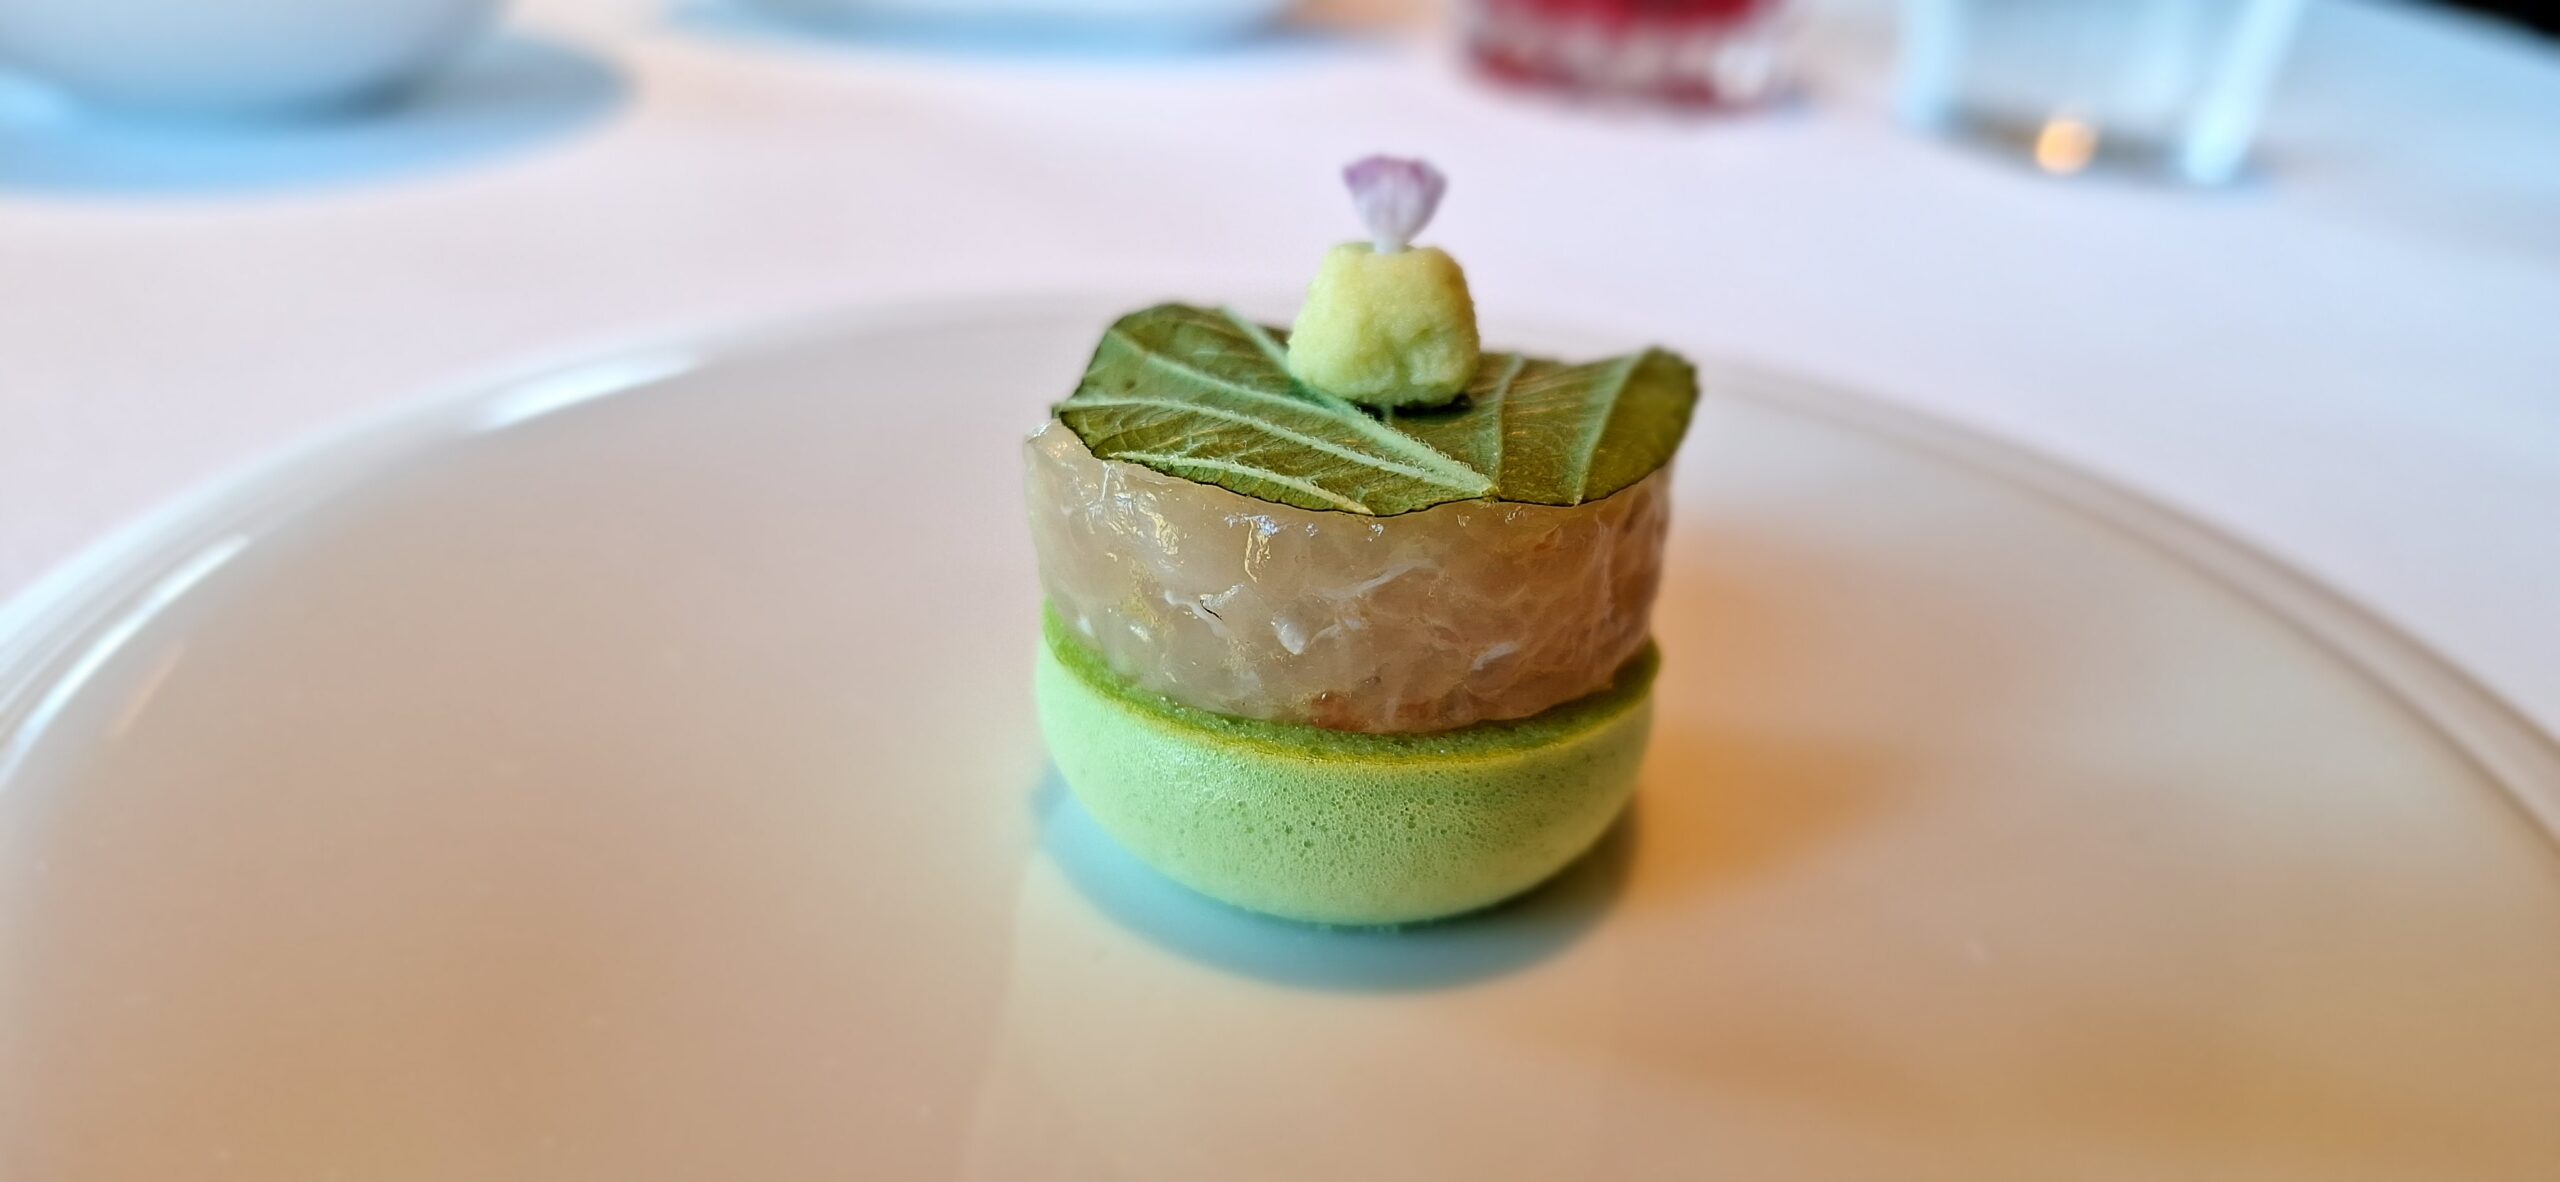 a small green dessert on a white plate